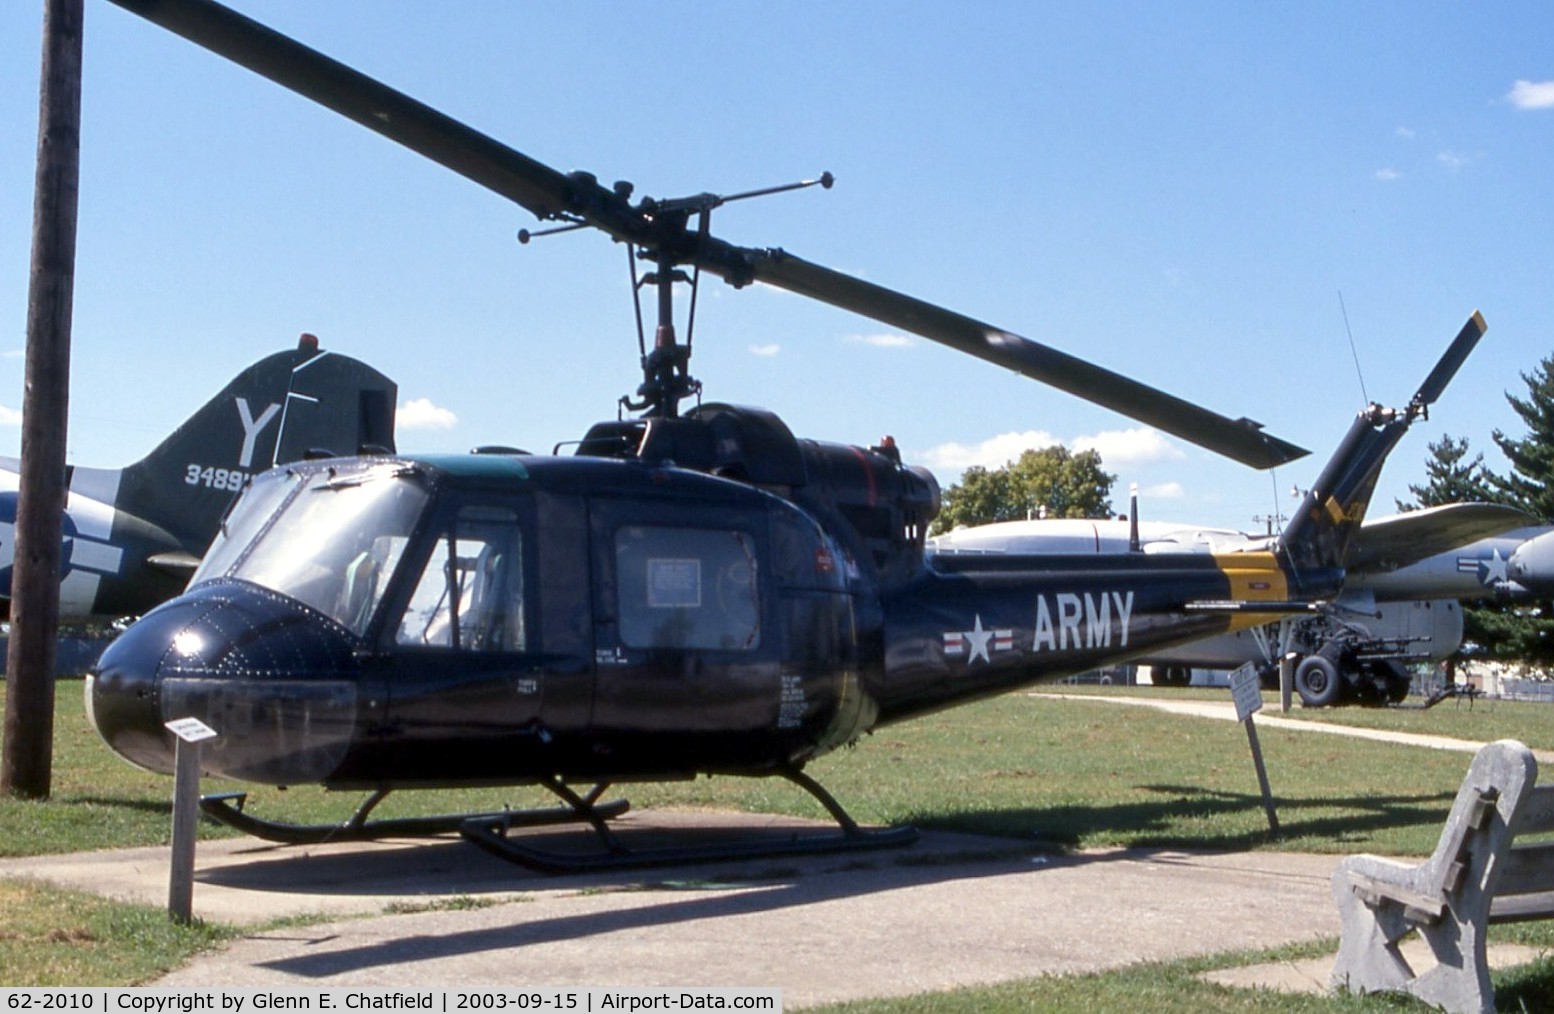 62-2010, 1962 Bell UH-1B Iroquois C/N 530, UH-1B at the 101st Airborne Division Museum